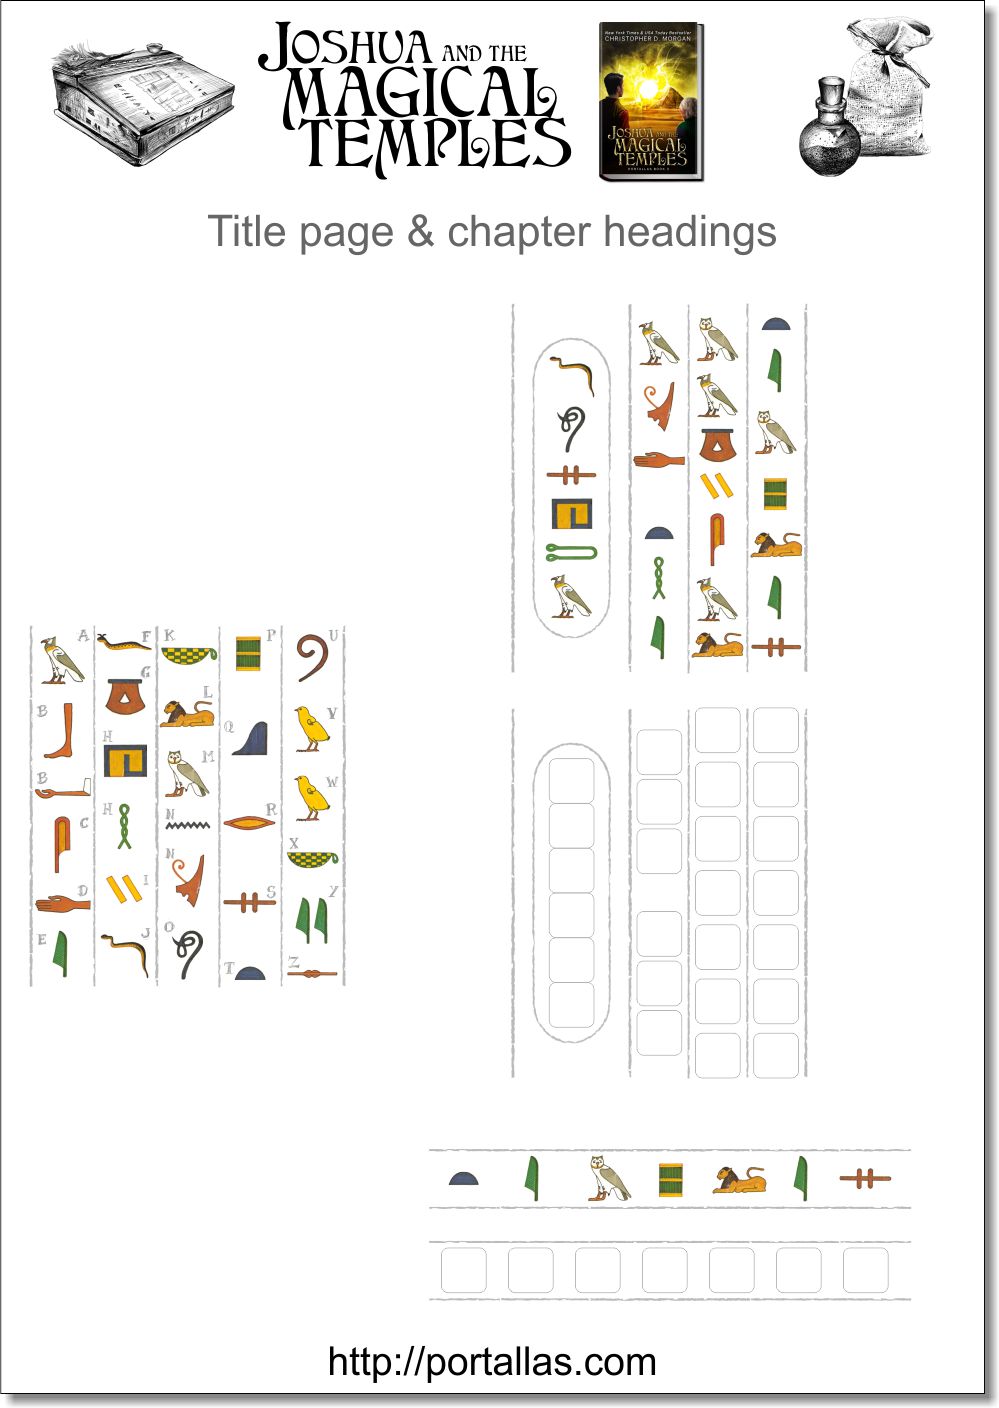 Title page & chapter headings